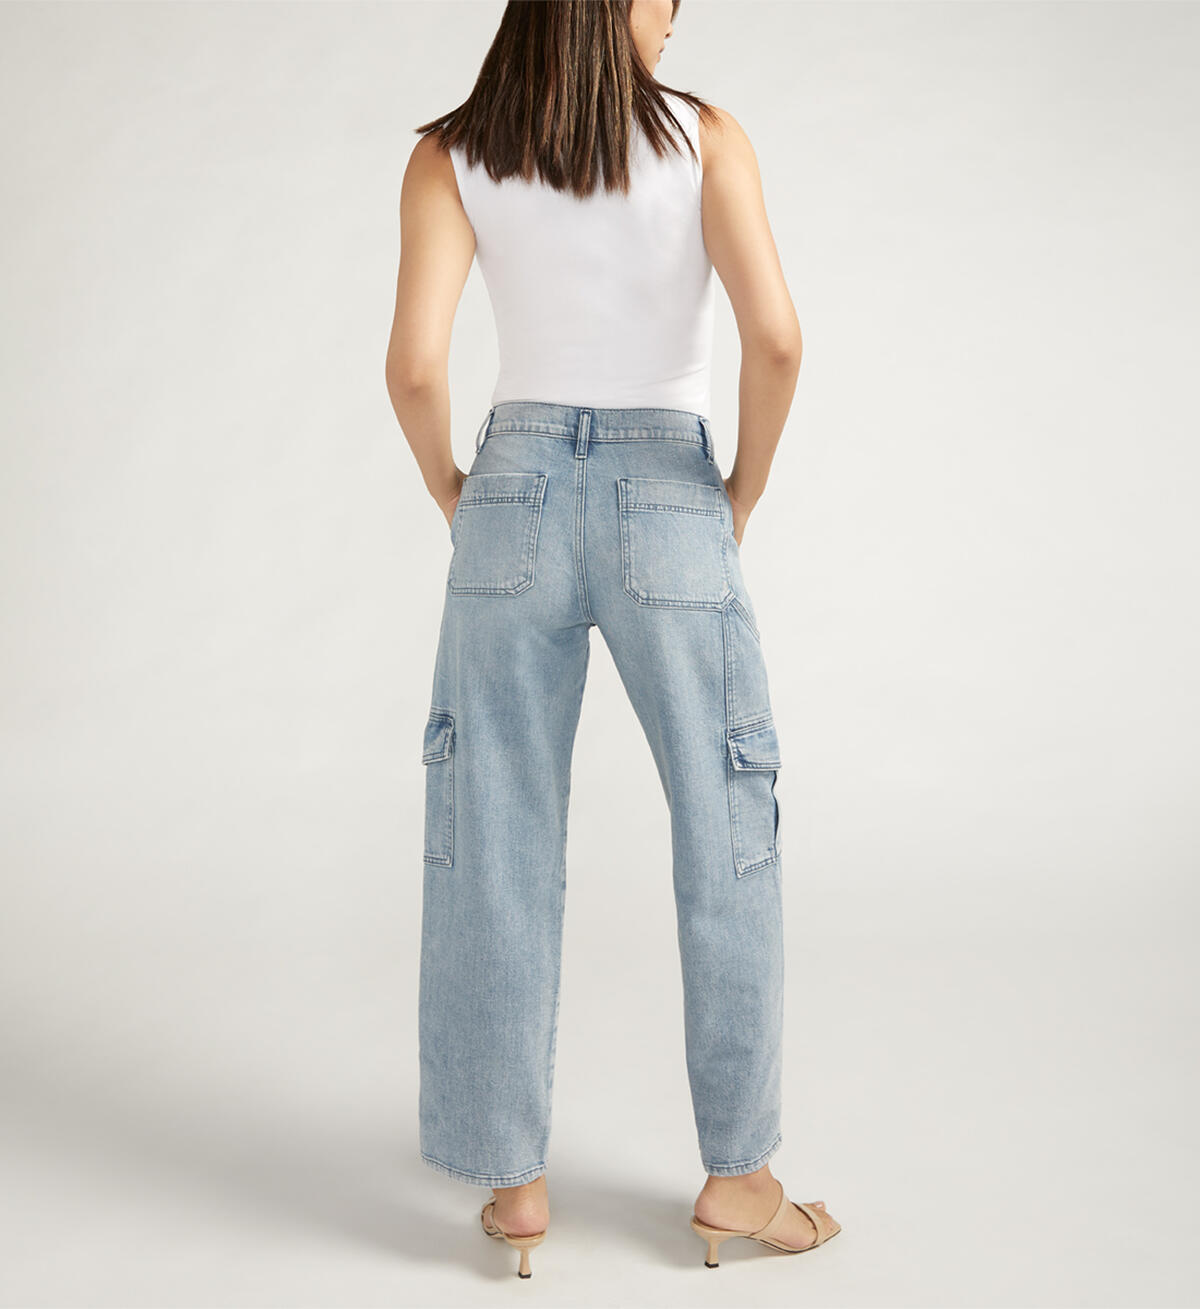 Utility Cargo Jeans, , hi-res image number 1